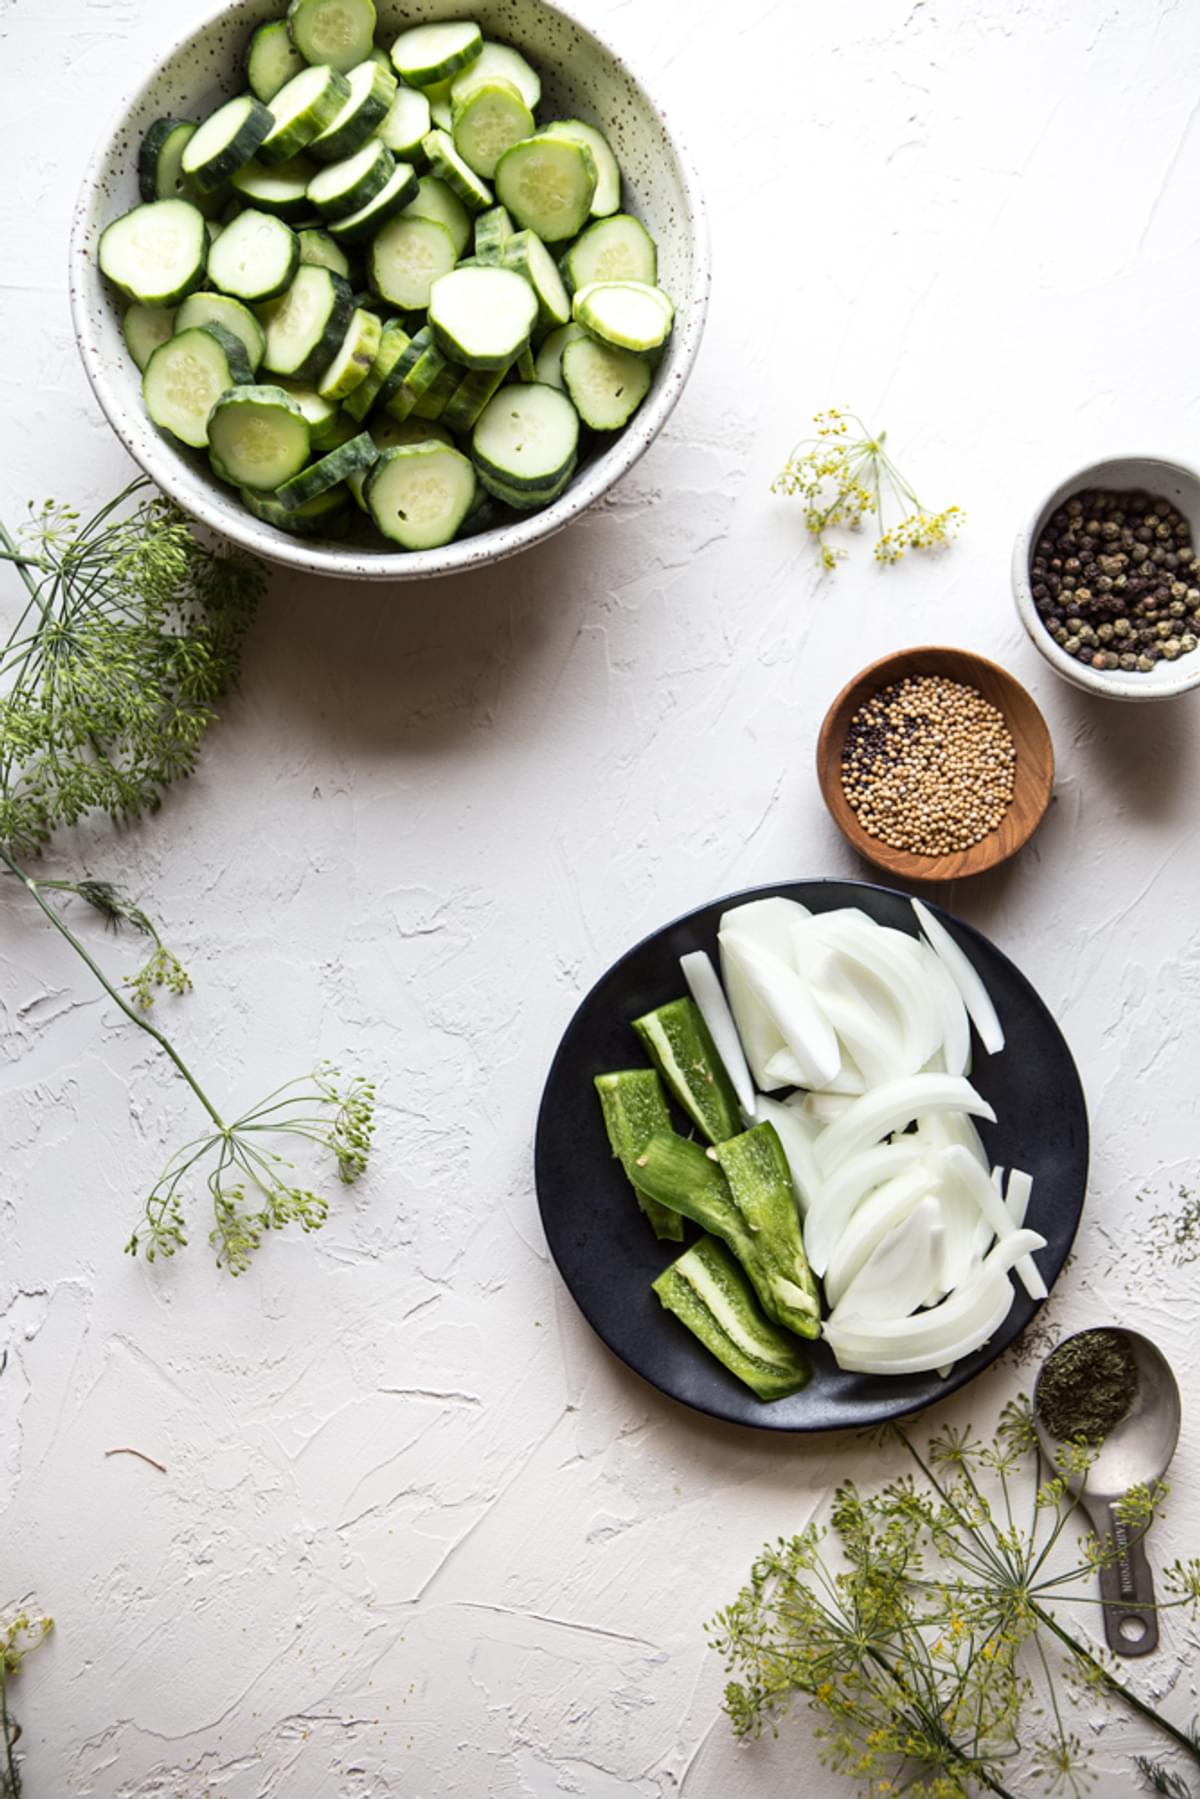 ingredients for easy homemade pickles; cucumber slices, onions, jalapenos, peppercord, coriander and dill